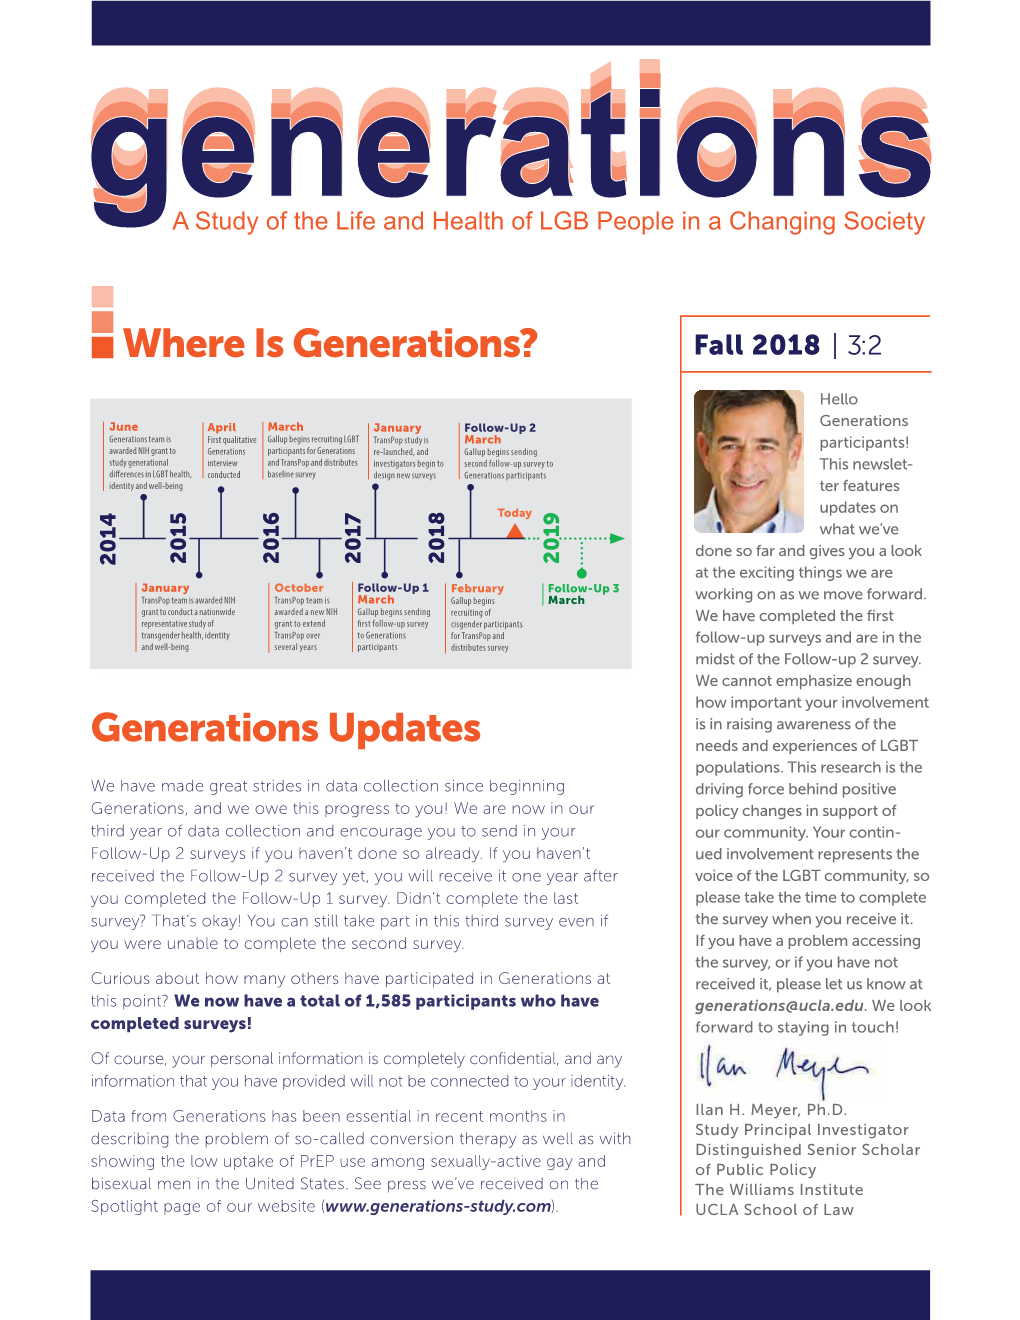 Generations Updates Needs and Experiences of LGBT Populations